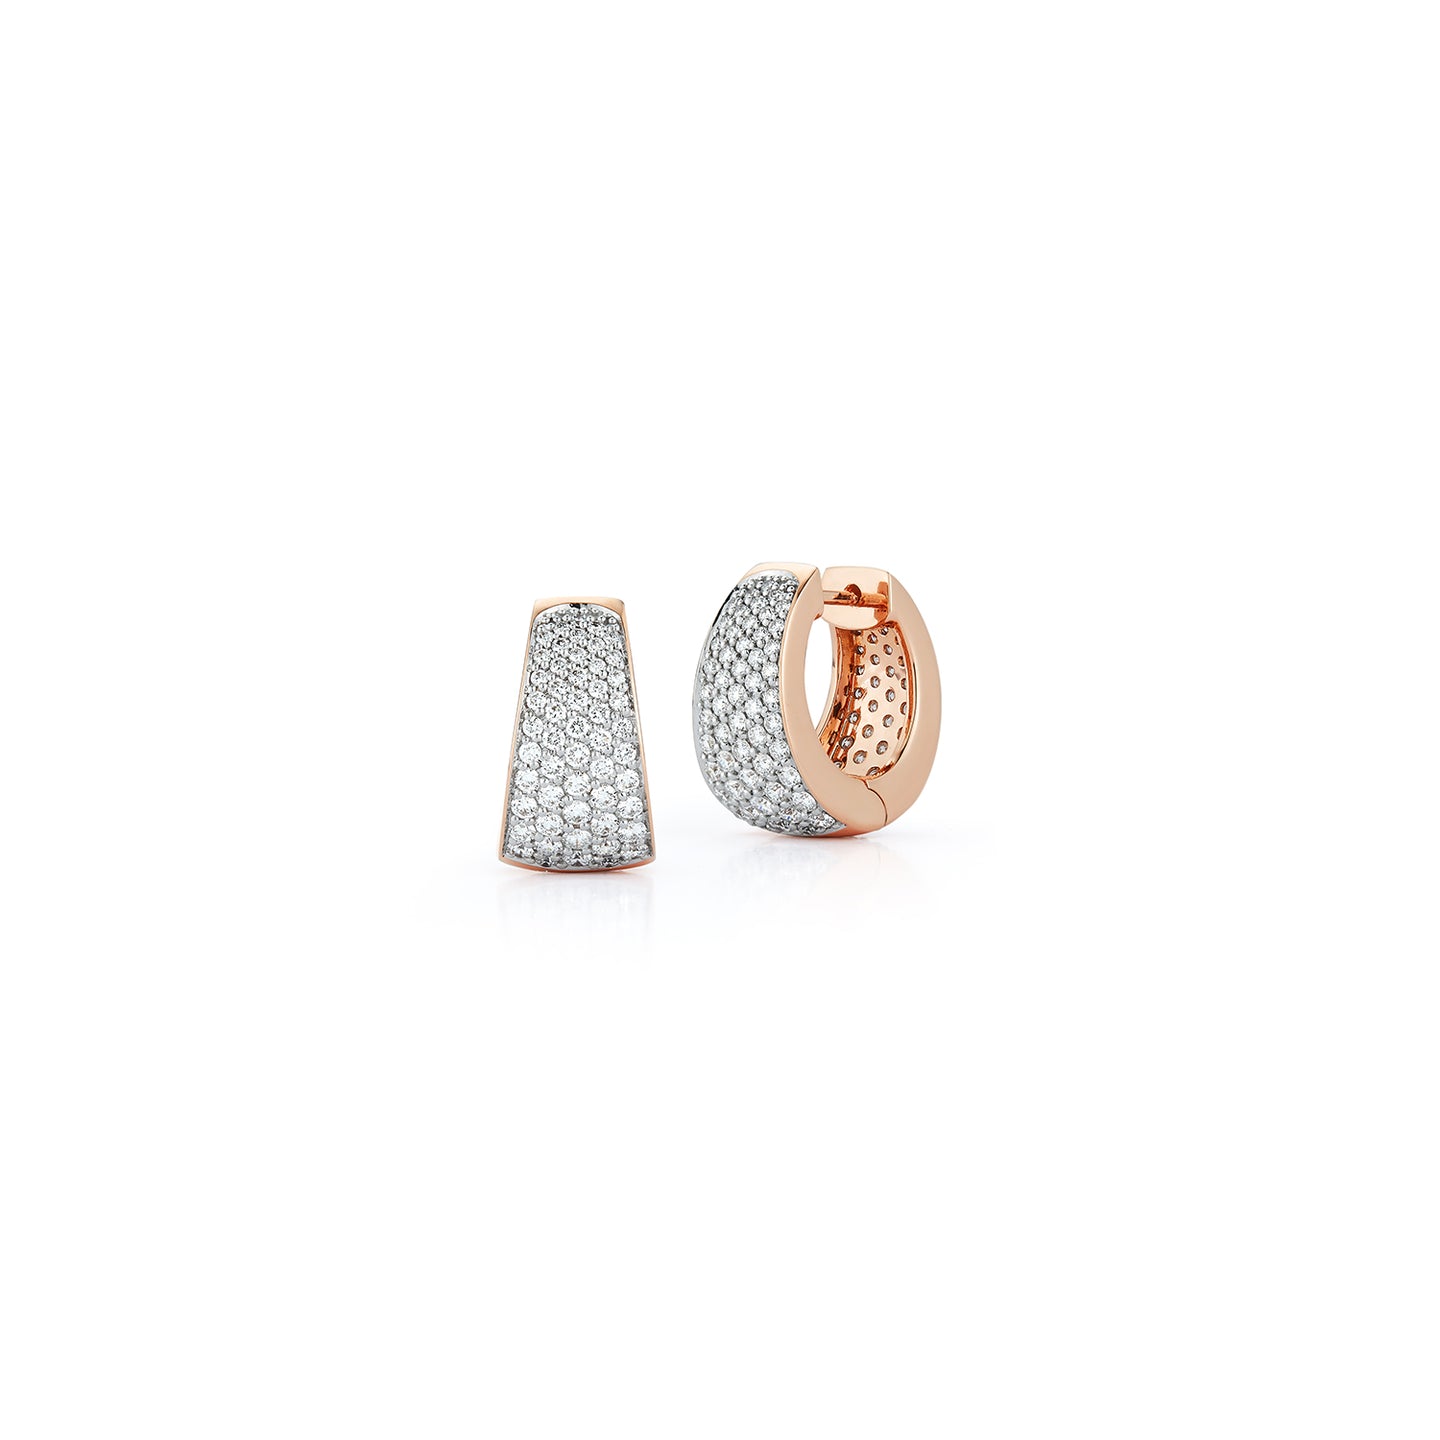 LYTTON 18K ROSE GOLD AND ALL DIAMOND PAVE TAPERING HOOP EARRINGS